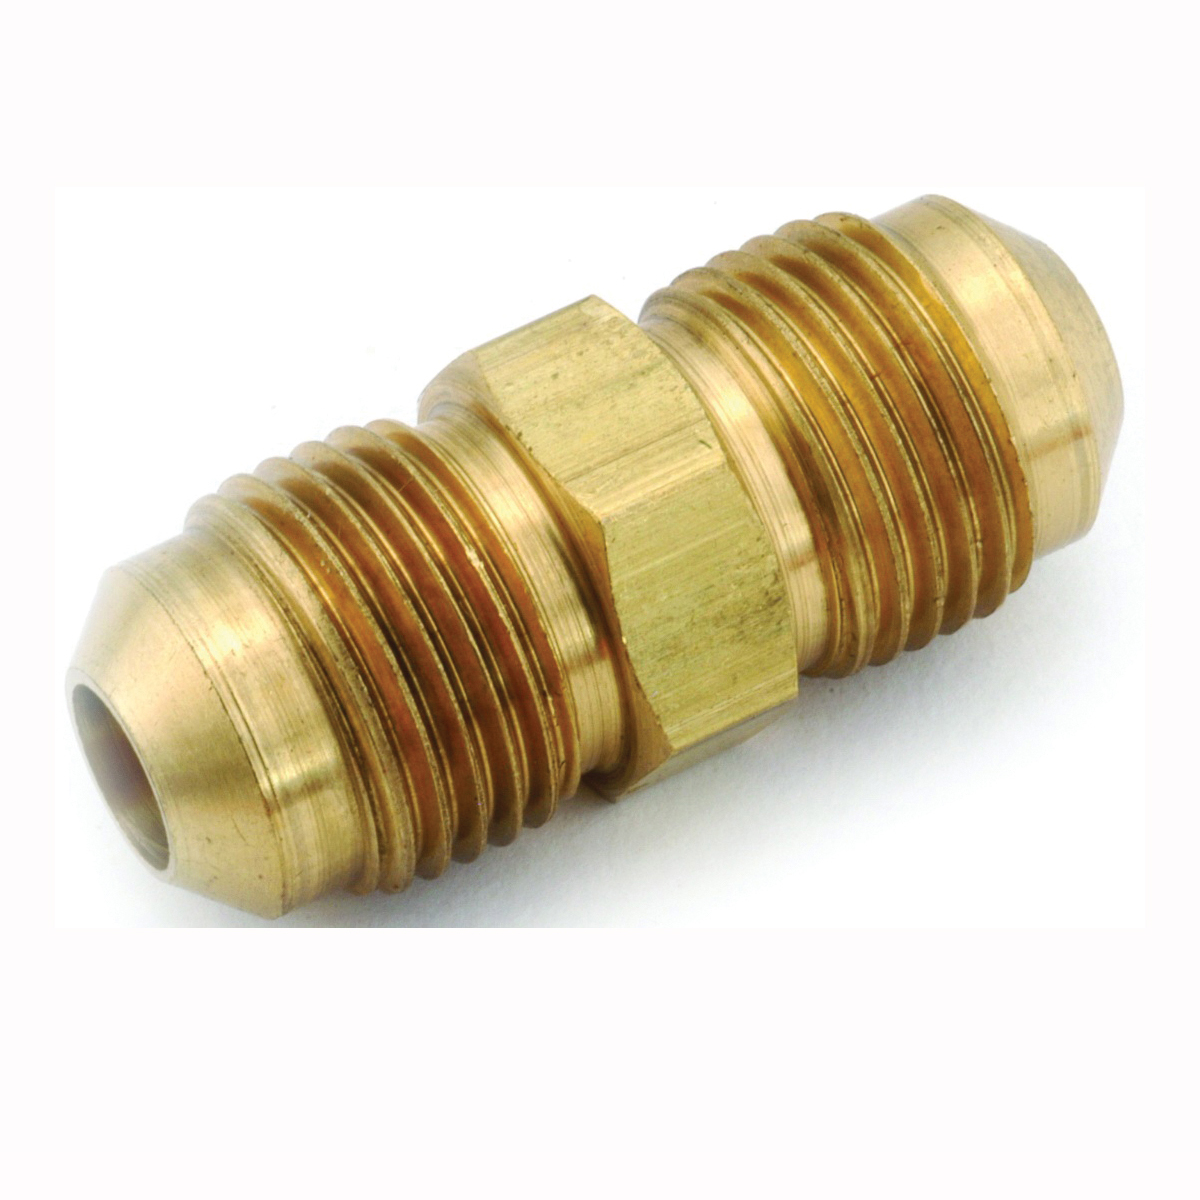 754042-05 Tube Union, 5/16 in, Flare, Brass